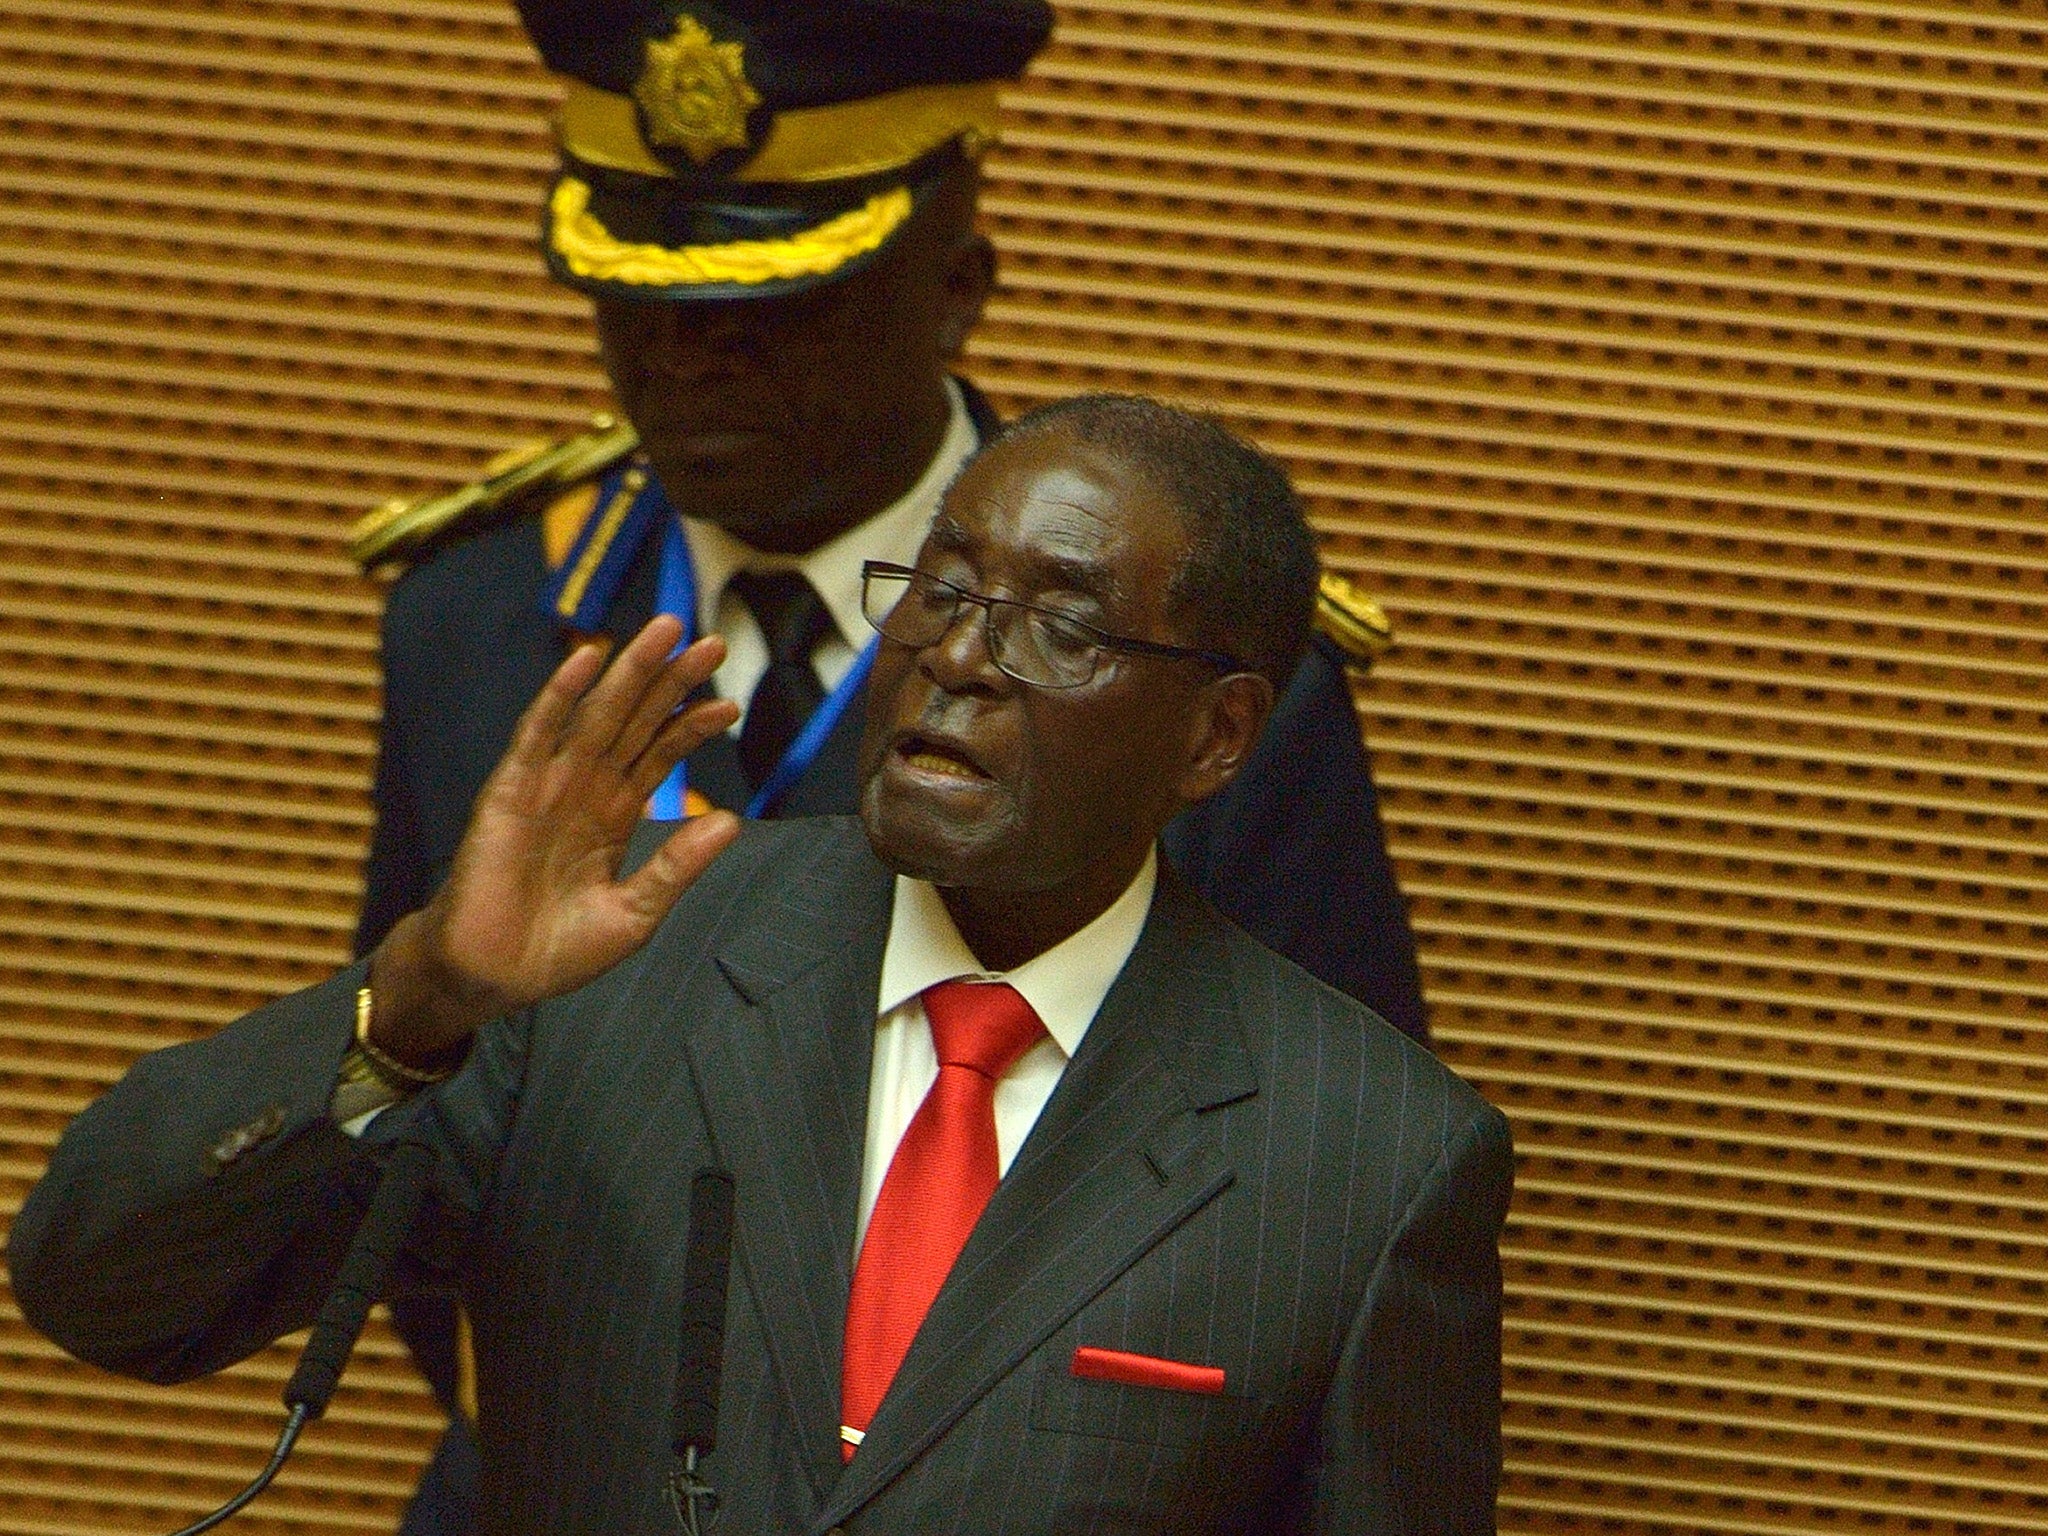 President Robert Mugabe declared a state of disaster to get more food aid from donors